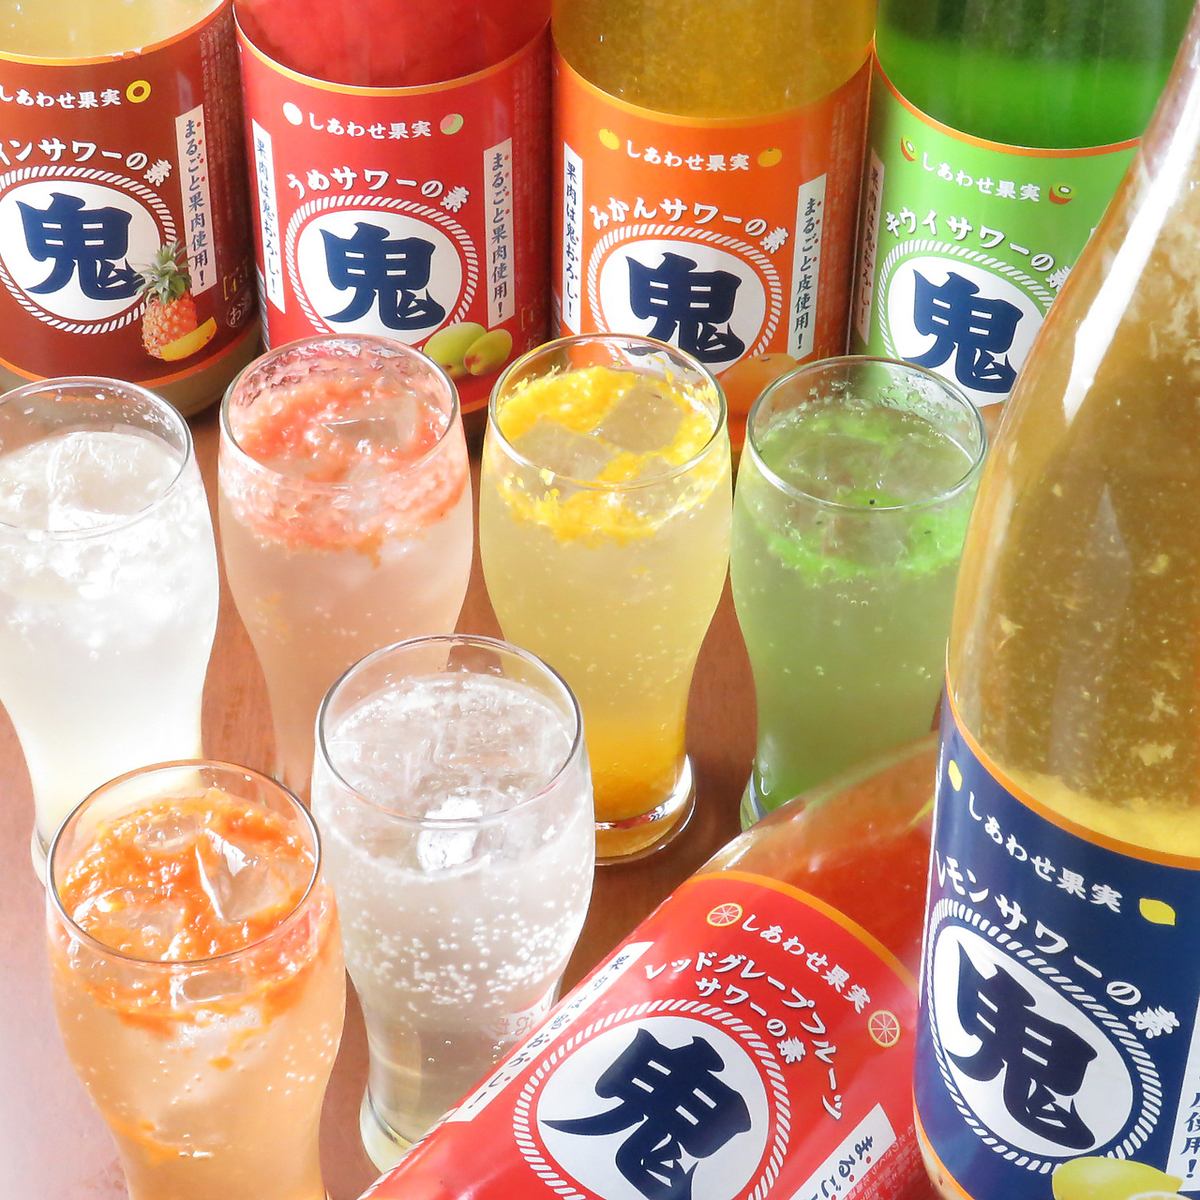 All-you-can-drink course starts from 2,500 yen for 120 minutes! Use coupon for 2,000 yen!